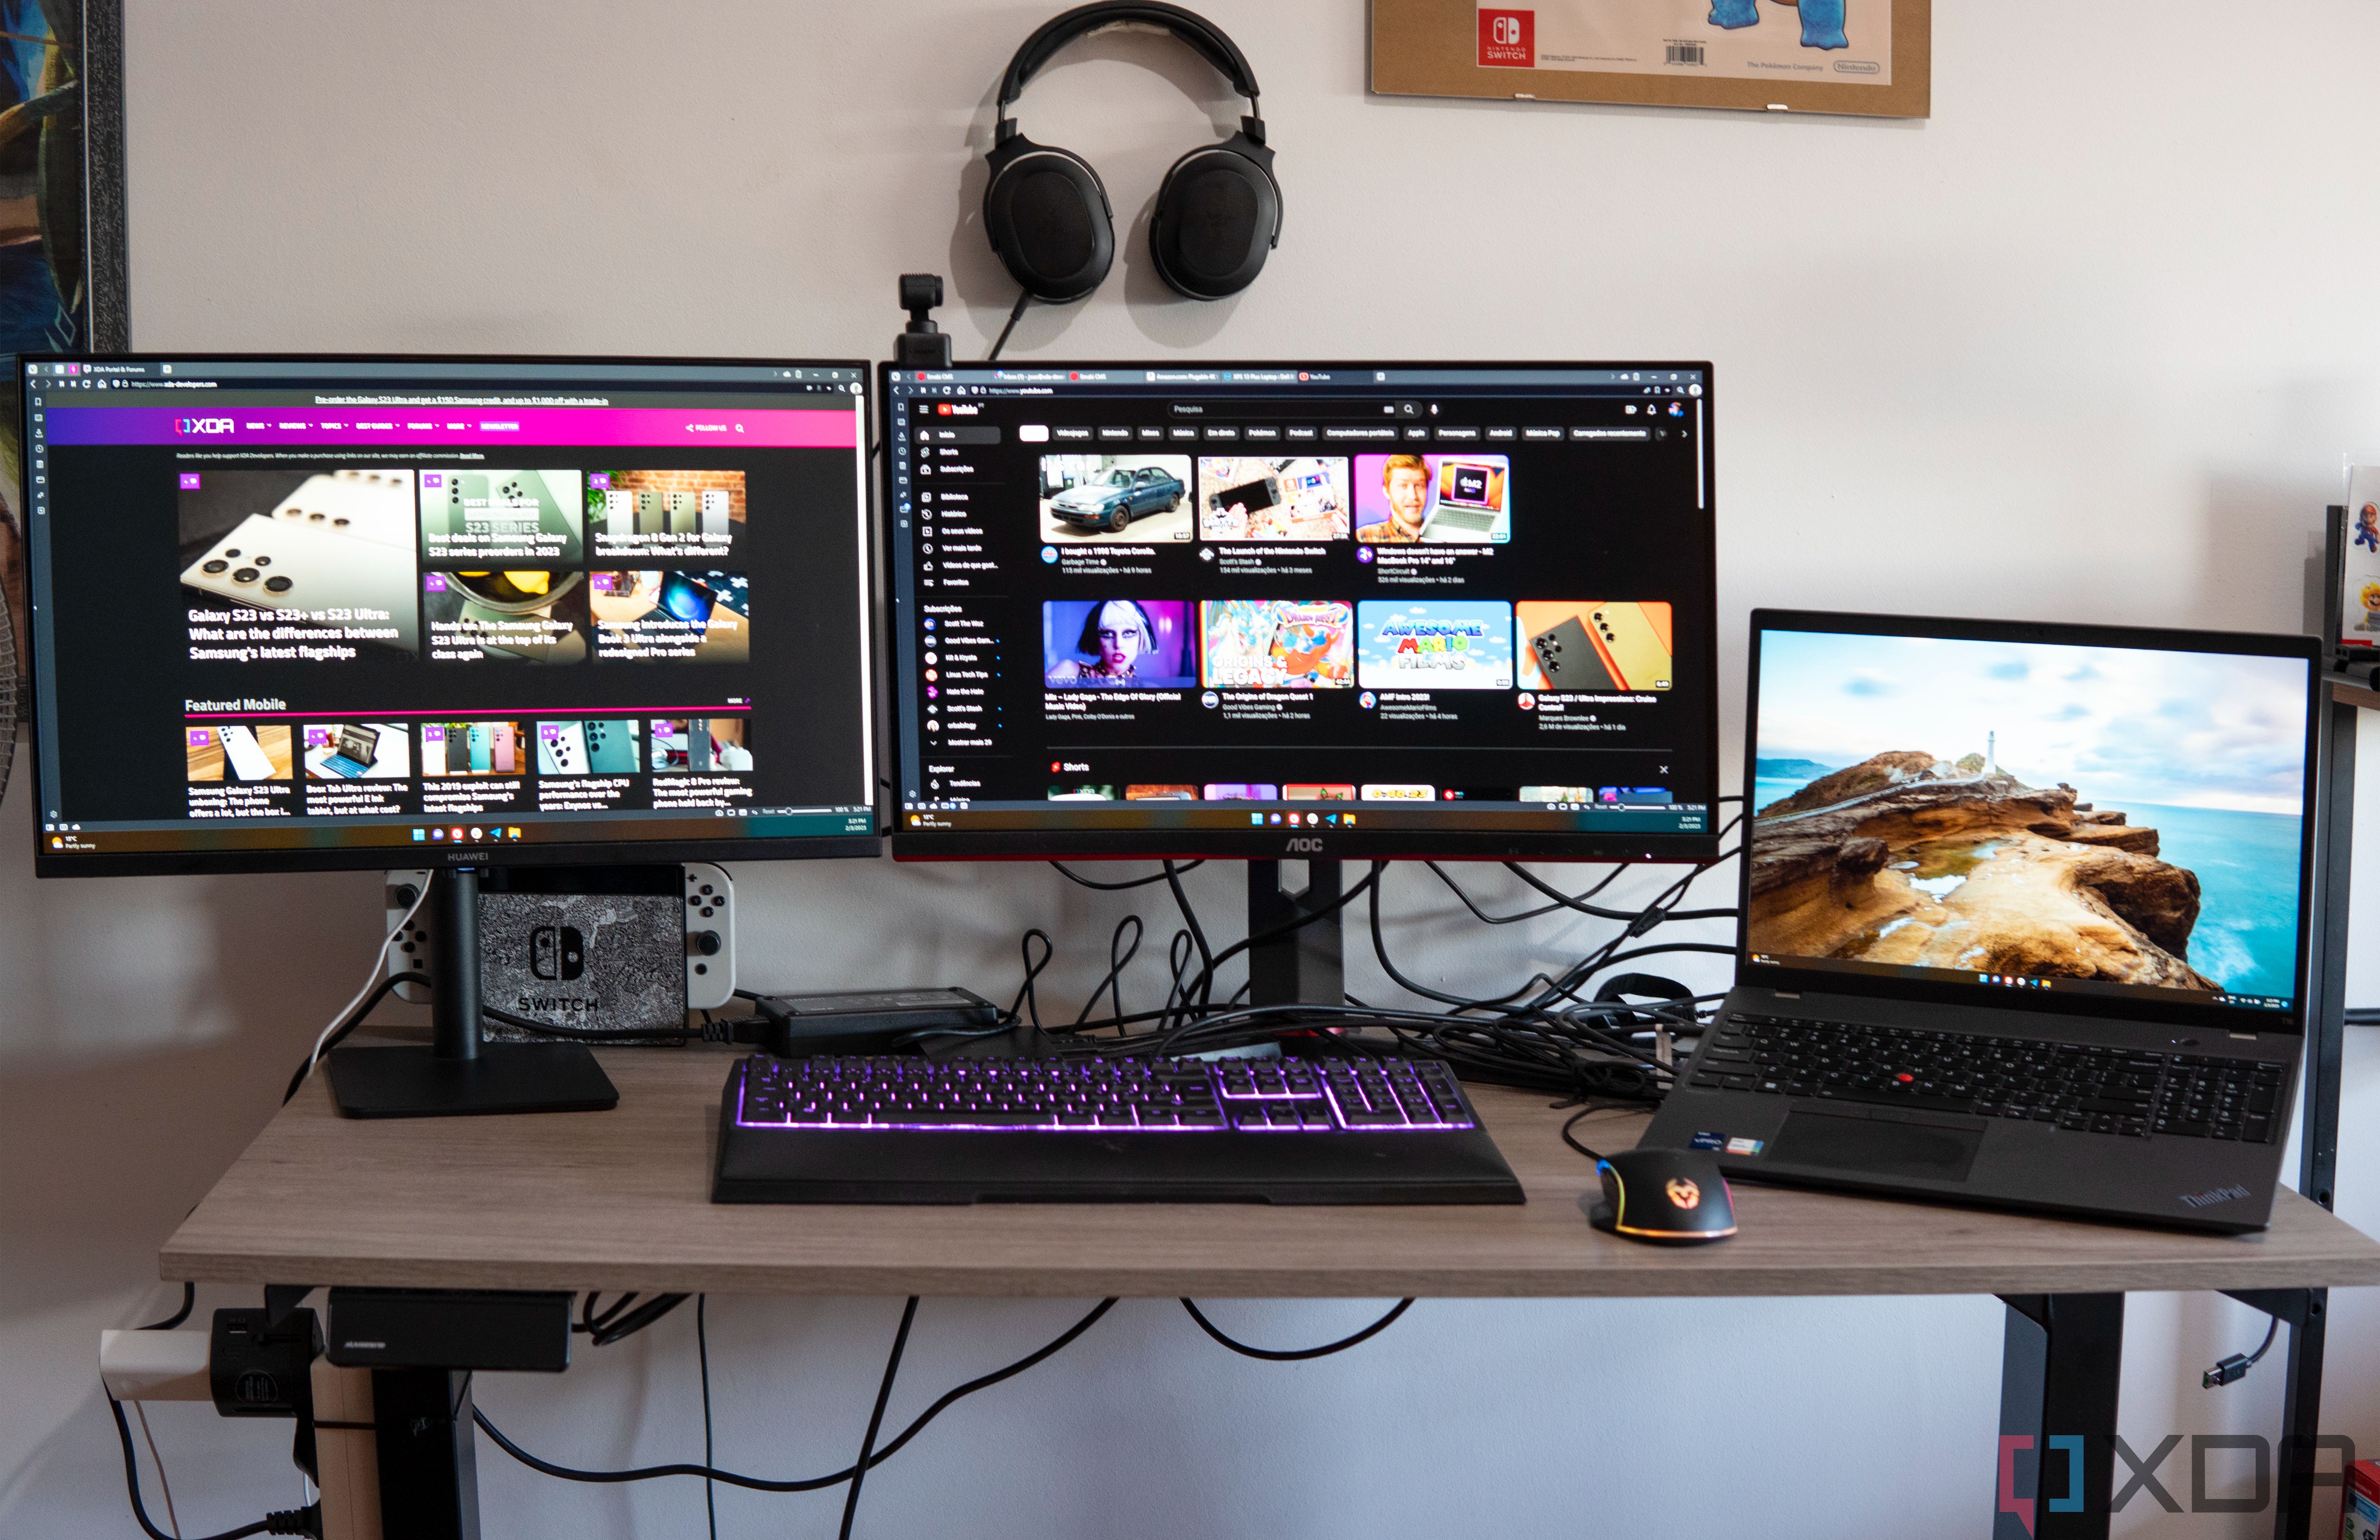 A laptop, two monitors, and various computer accessories on a table